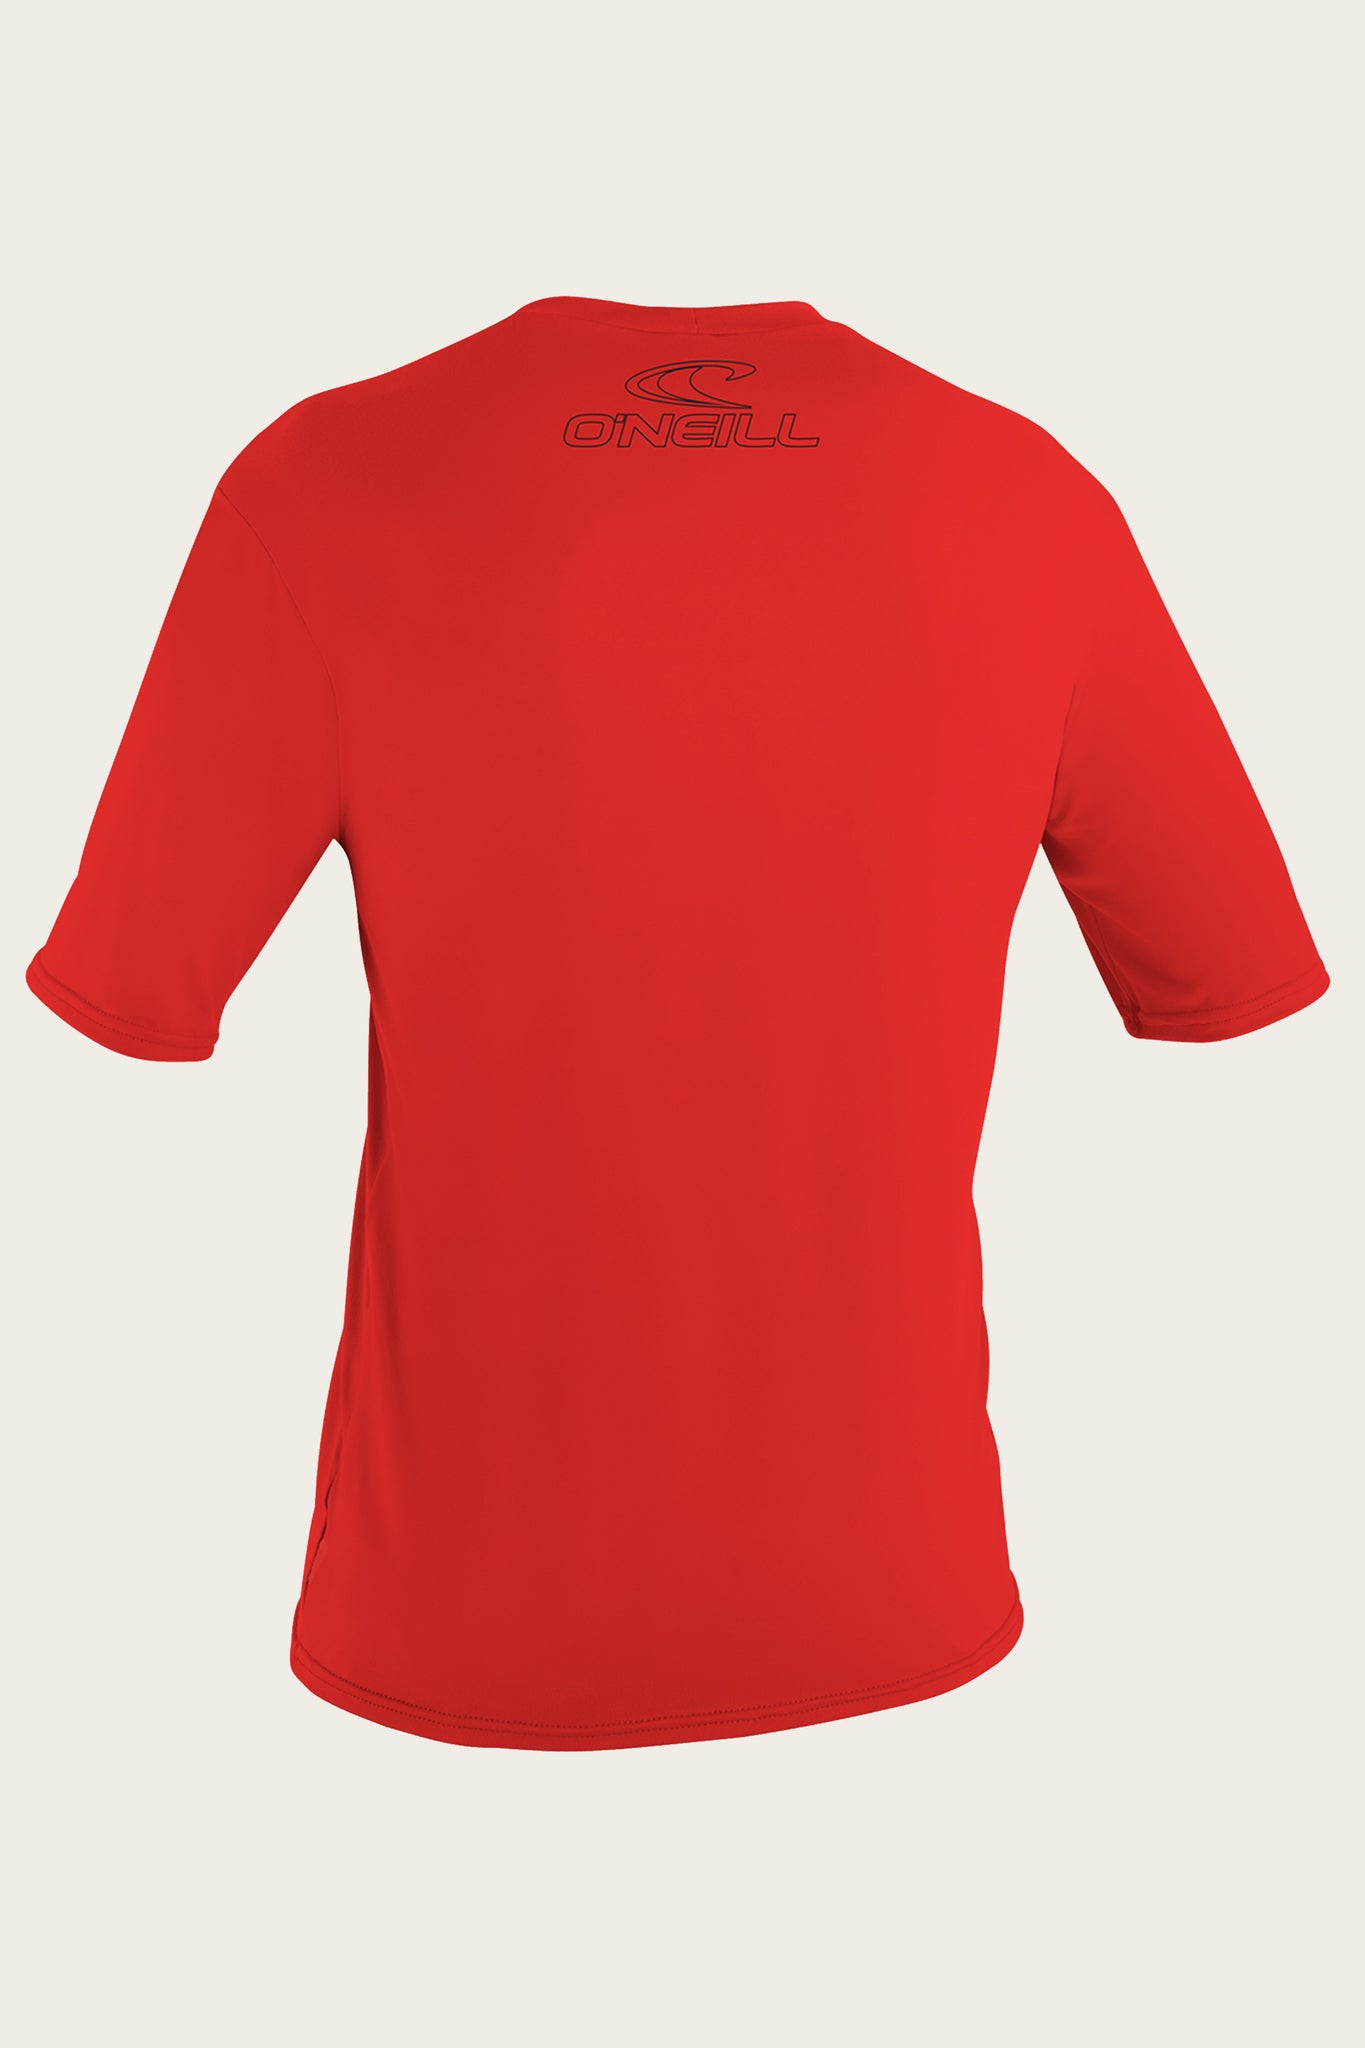 Youth Basic Skins 50+ S/S Sun Shirt - Red | O'Neill